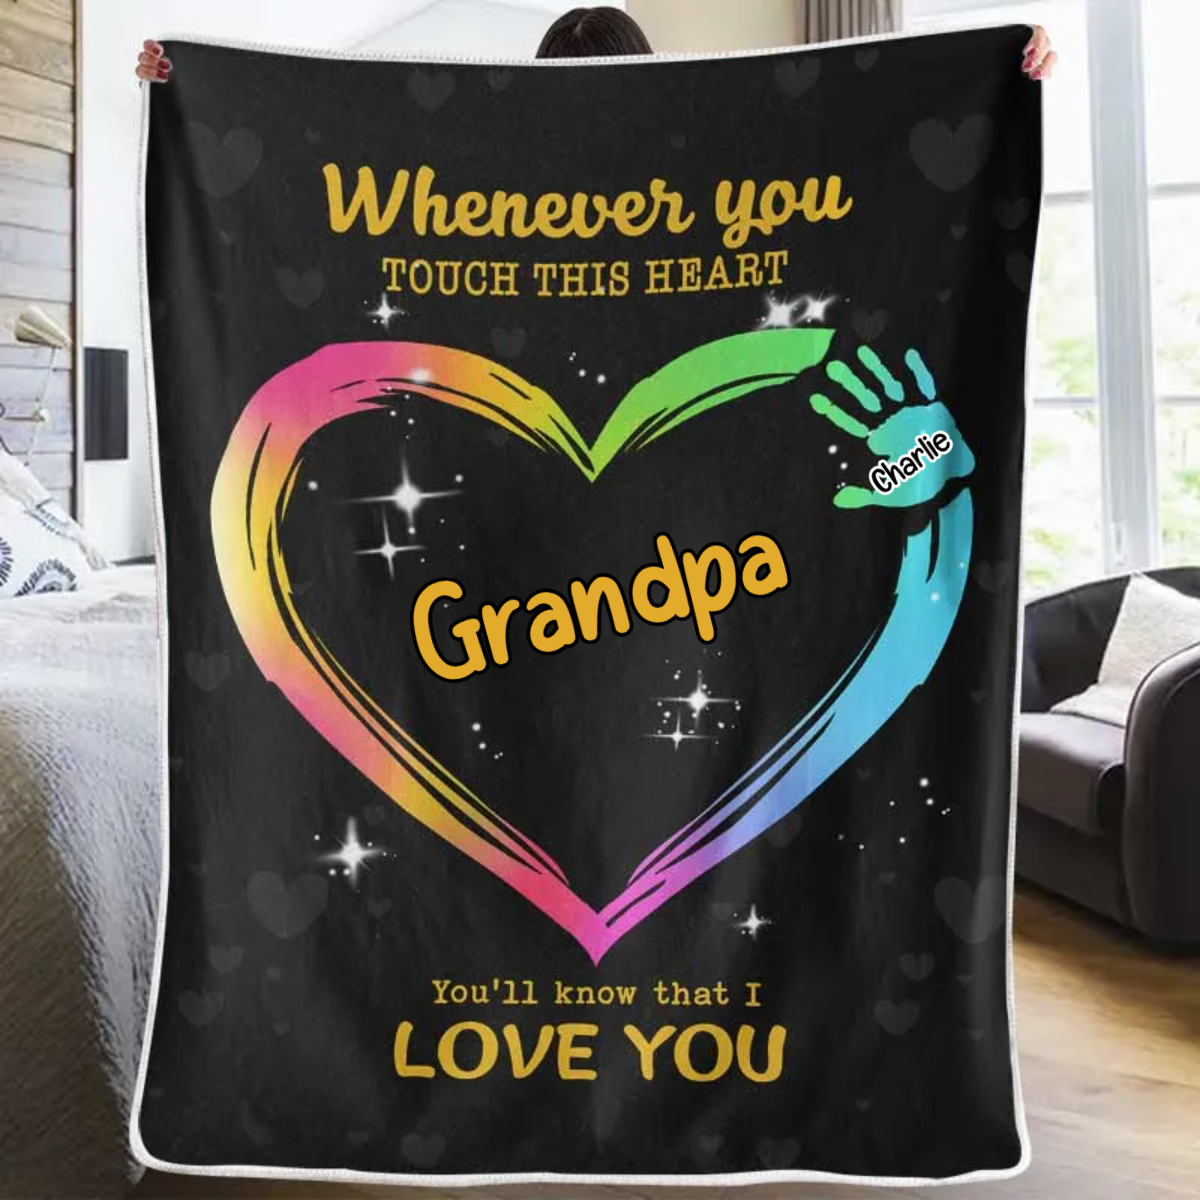 You’ll Know That We Love You - Gift For Grandma, Grandparents, Christmas Gift - Personalized Blanket